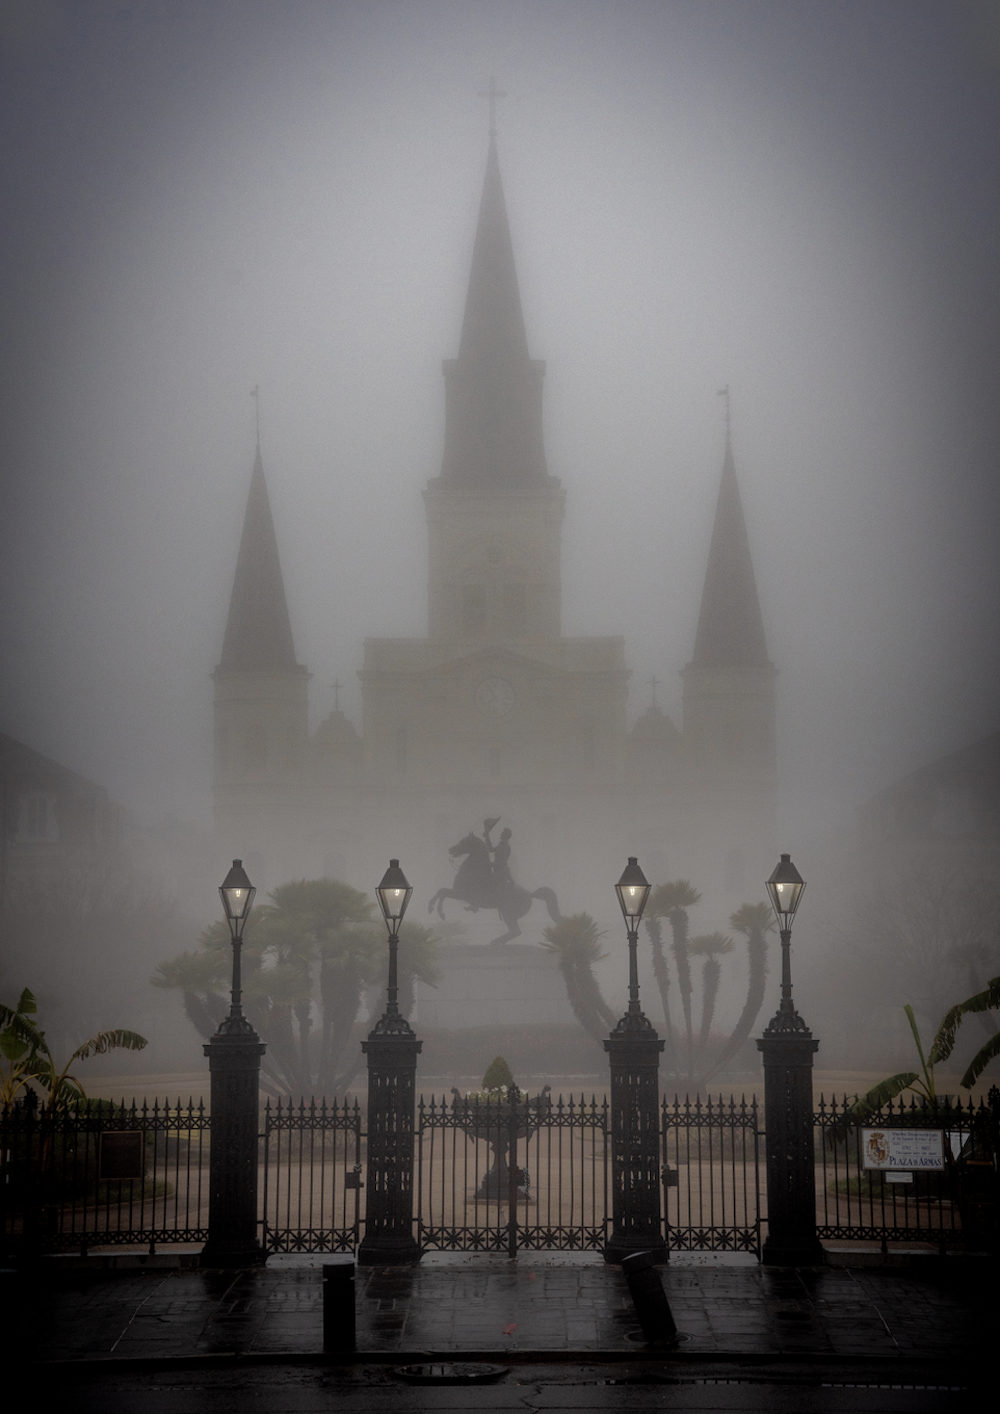 Large Gothic Building In Heavy Fog With Gated Fence